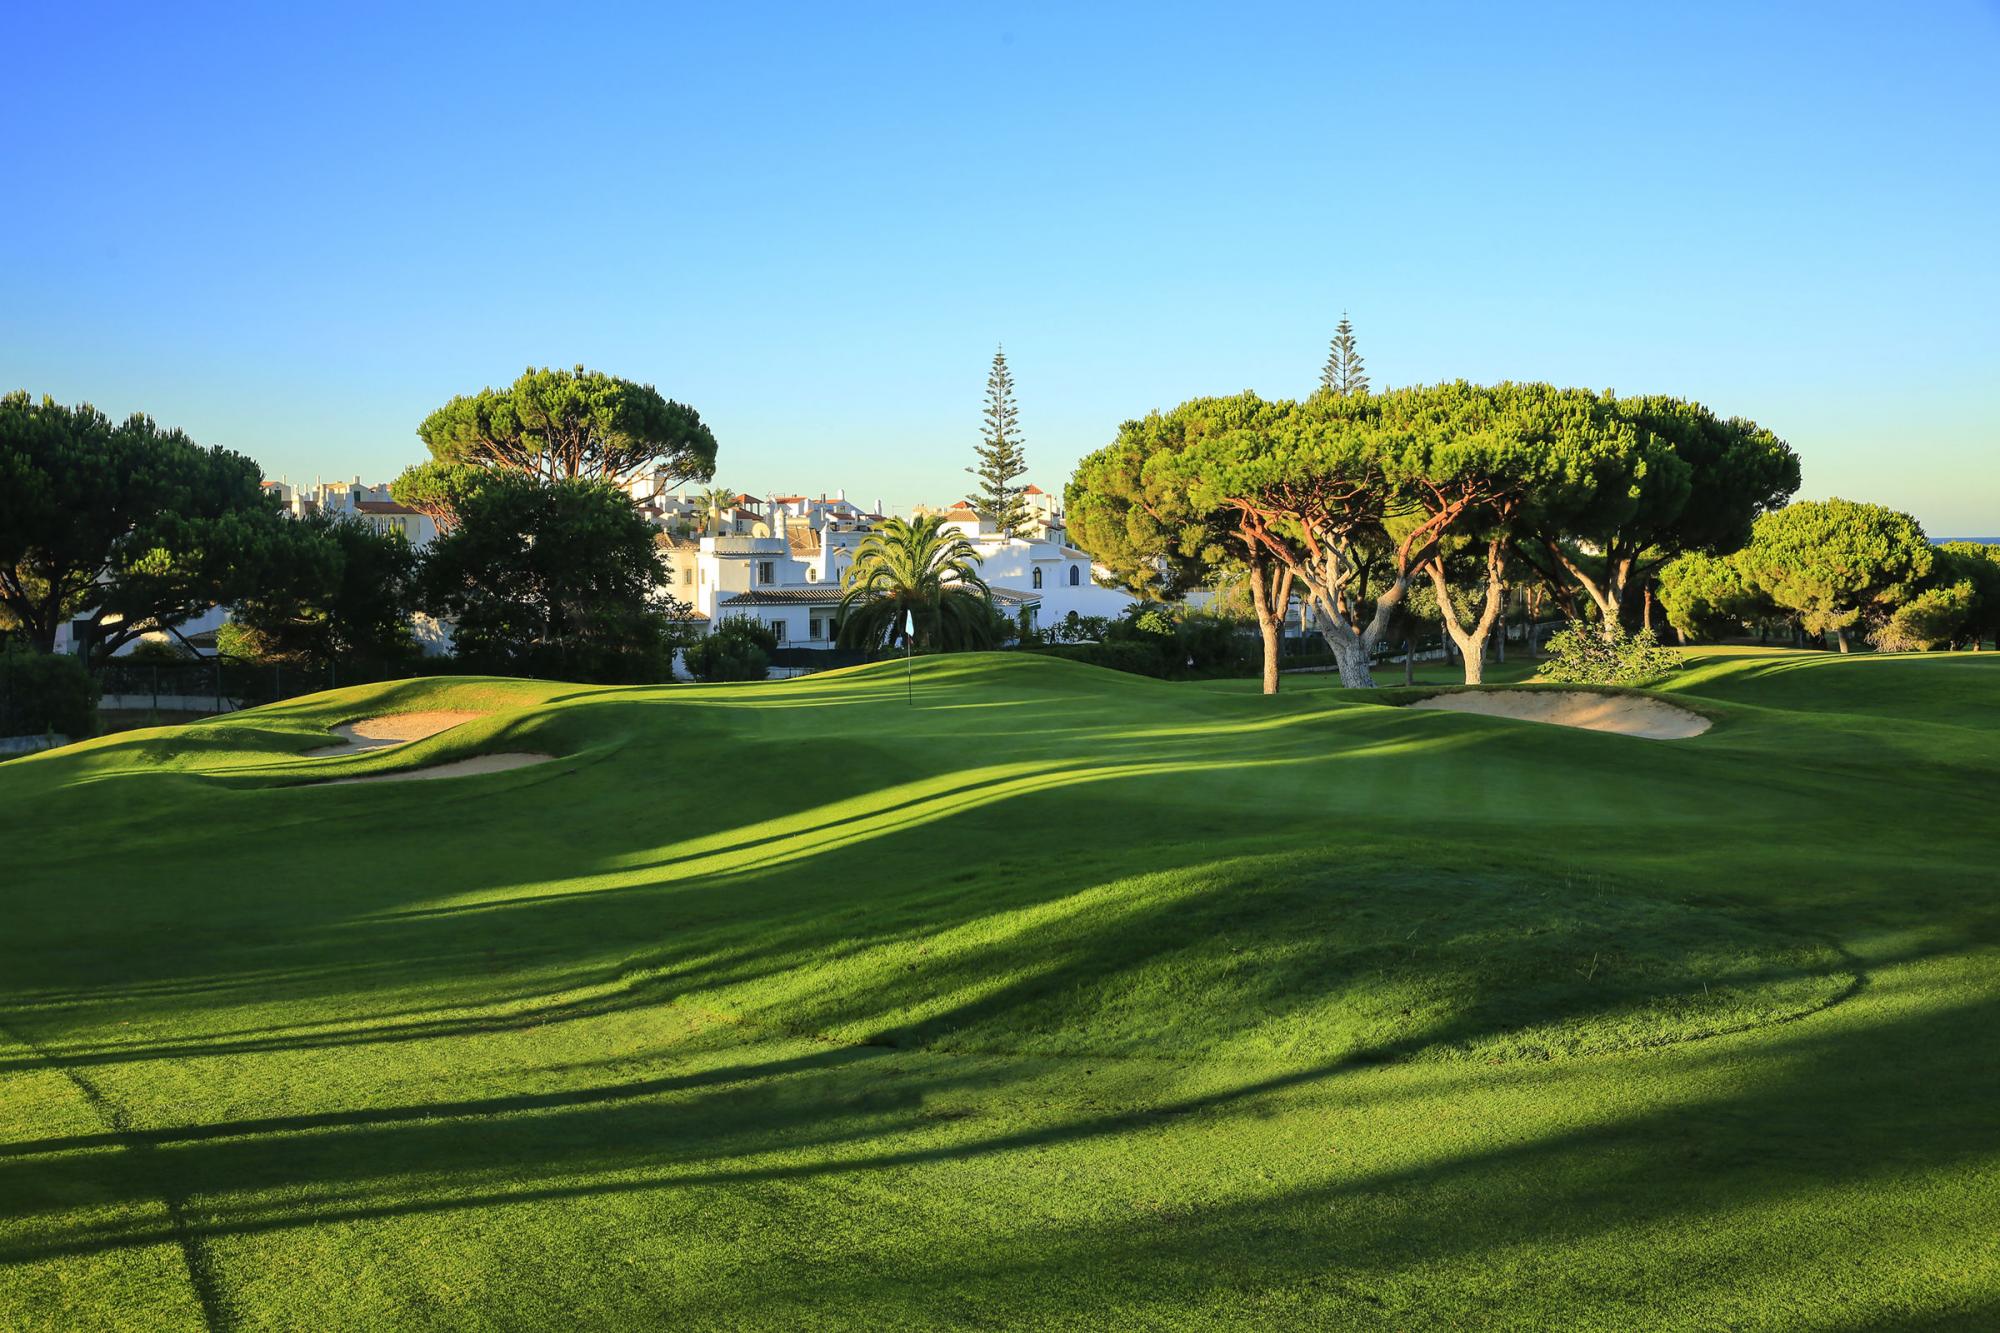 The Dom Pedro Pinhal Golf Course's beautiful golf course in striking Algarve.